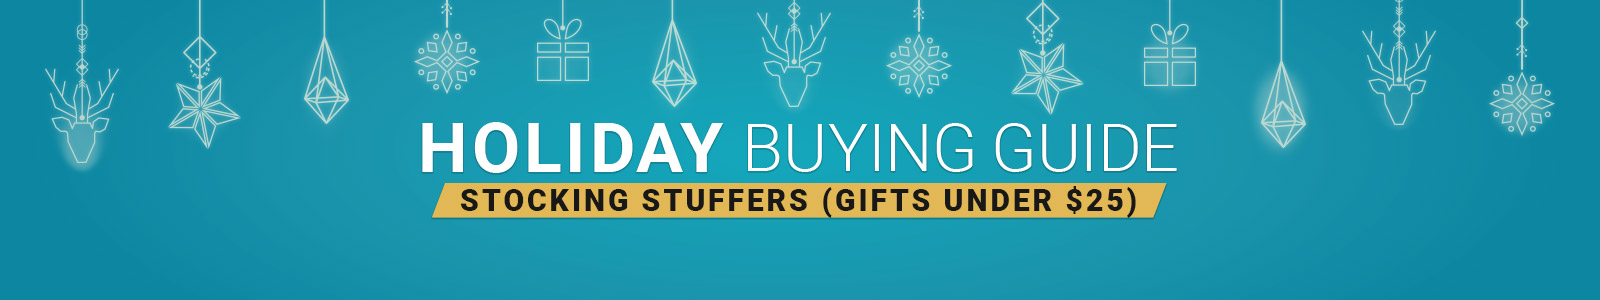 Holiday Buying Guide
Stocking Stuffers (Gifts under $25)
Shop Now